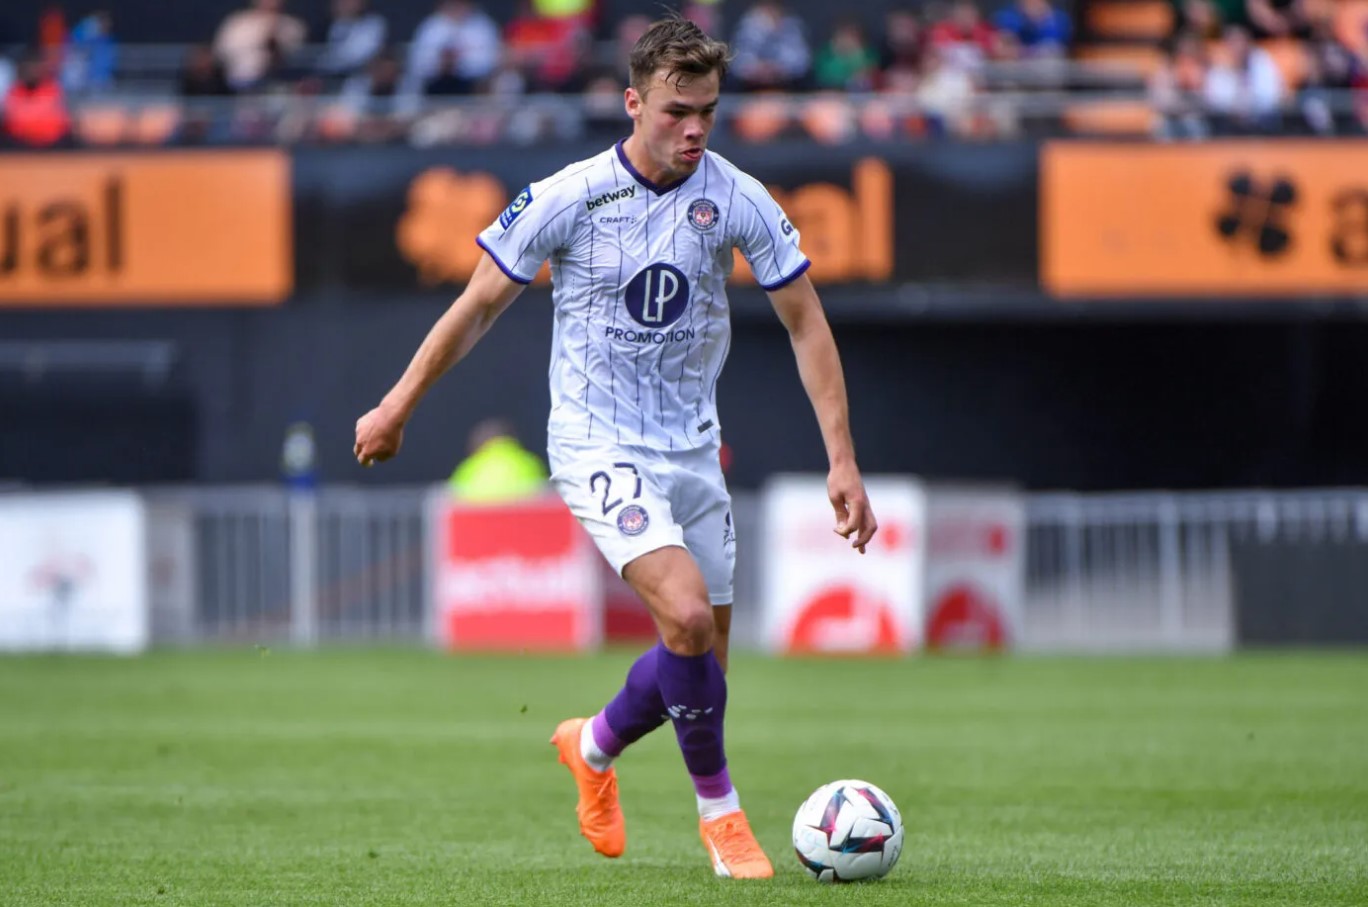 soccer picks Thijs Dallinga Toulouse predictions best bet odds